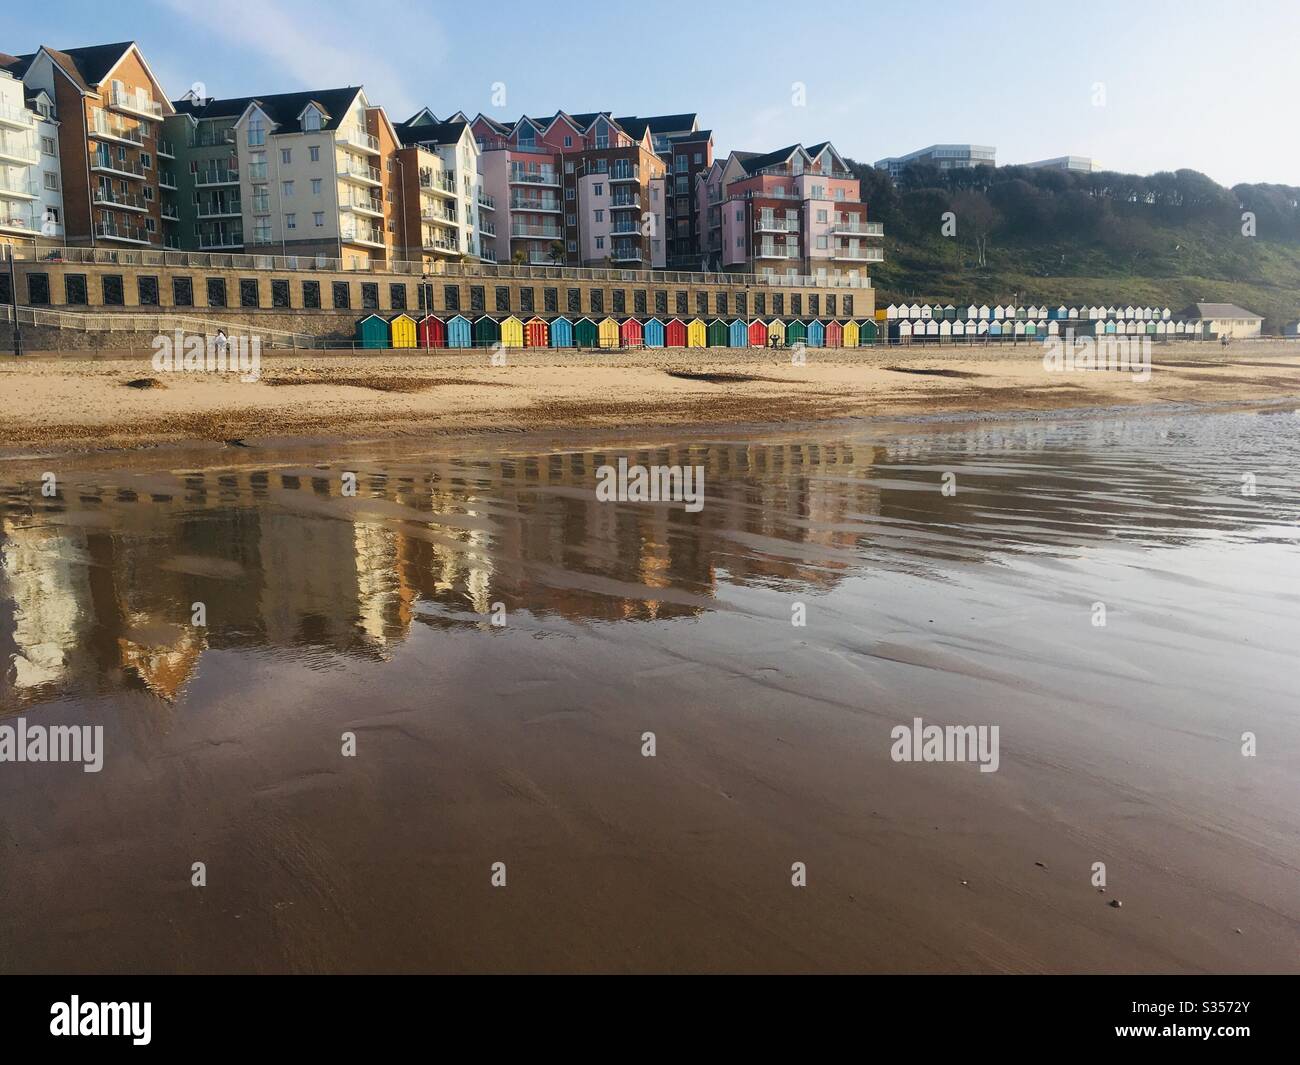 Beach huts and reflections in the sand at low tide on Boscombe Beach, Dorset, UK Stock Photo